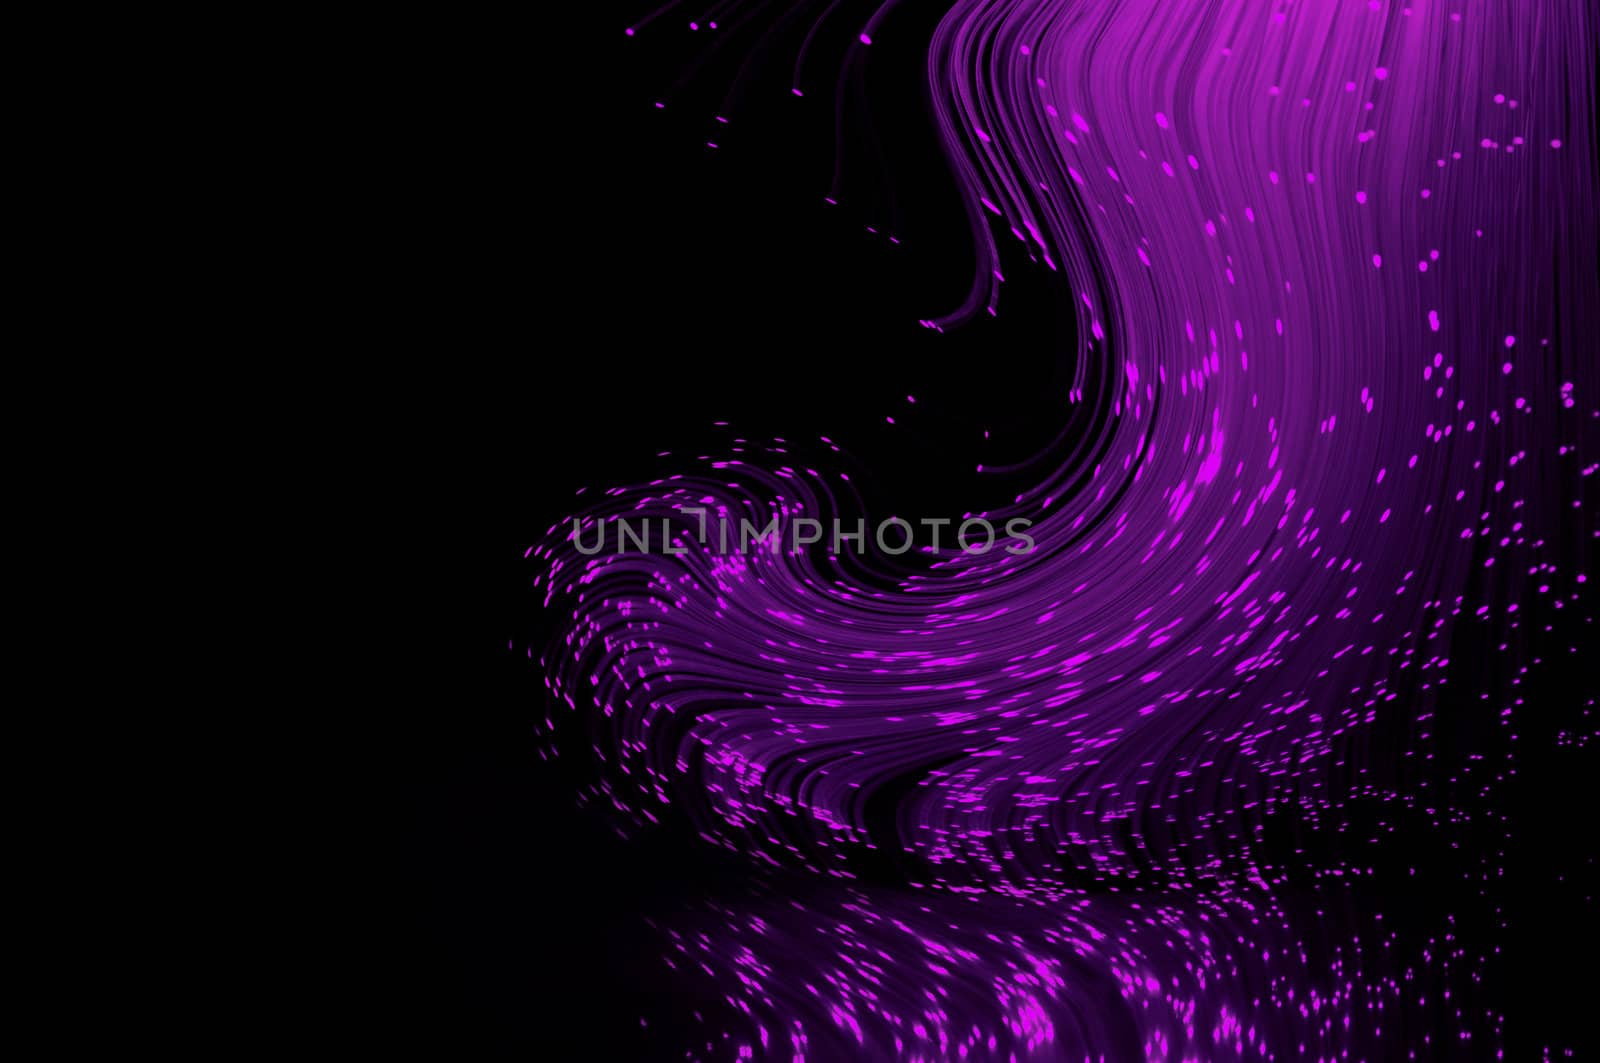 Mauve coloured fiber optic light strands swirling against a black background and reflecting into the foreground.